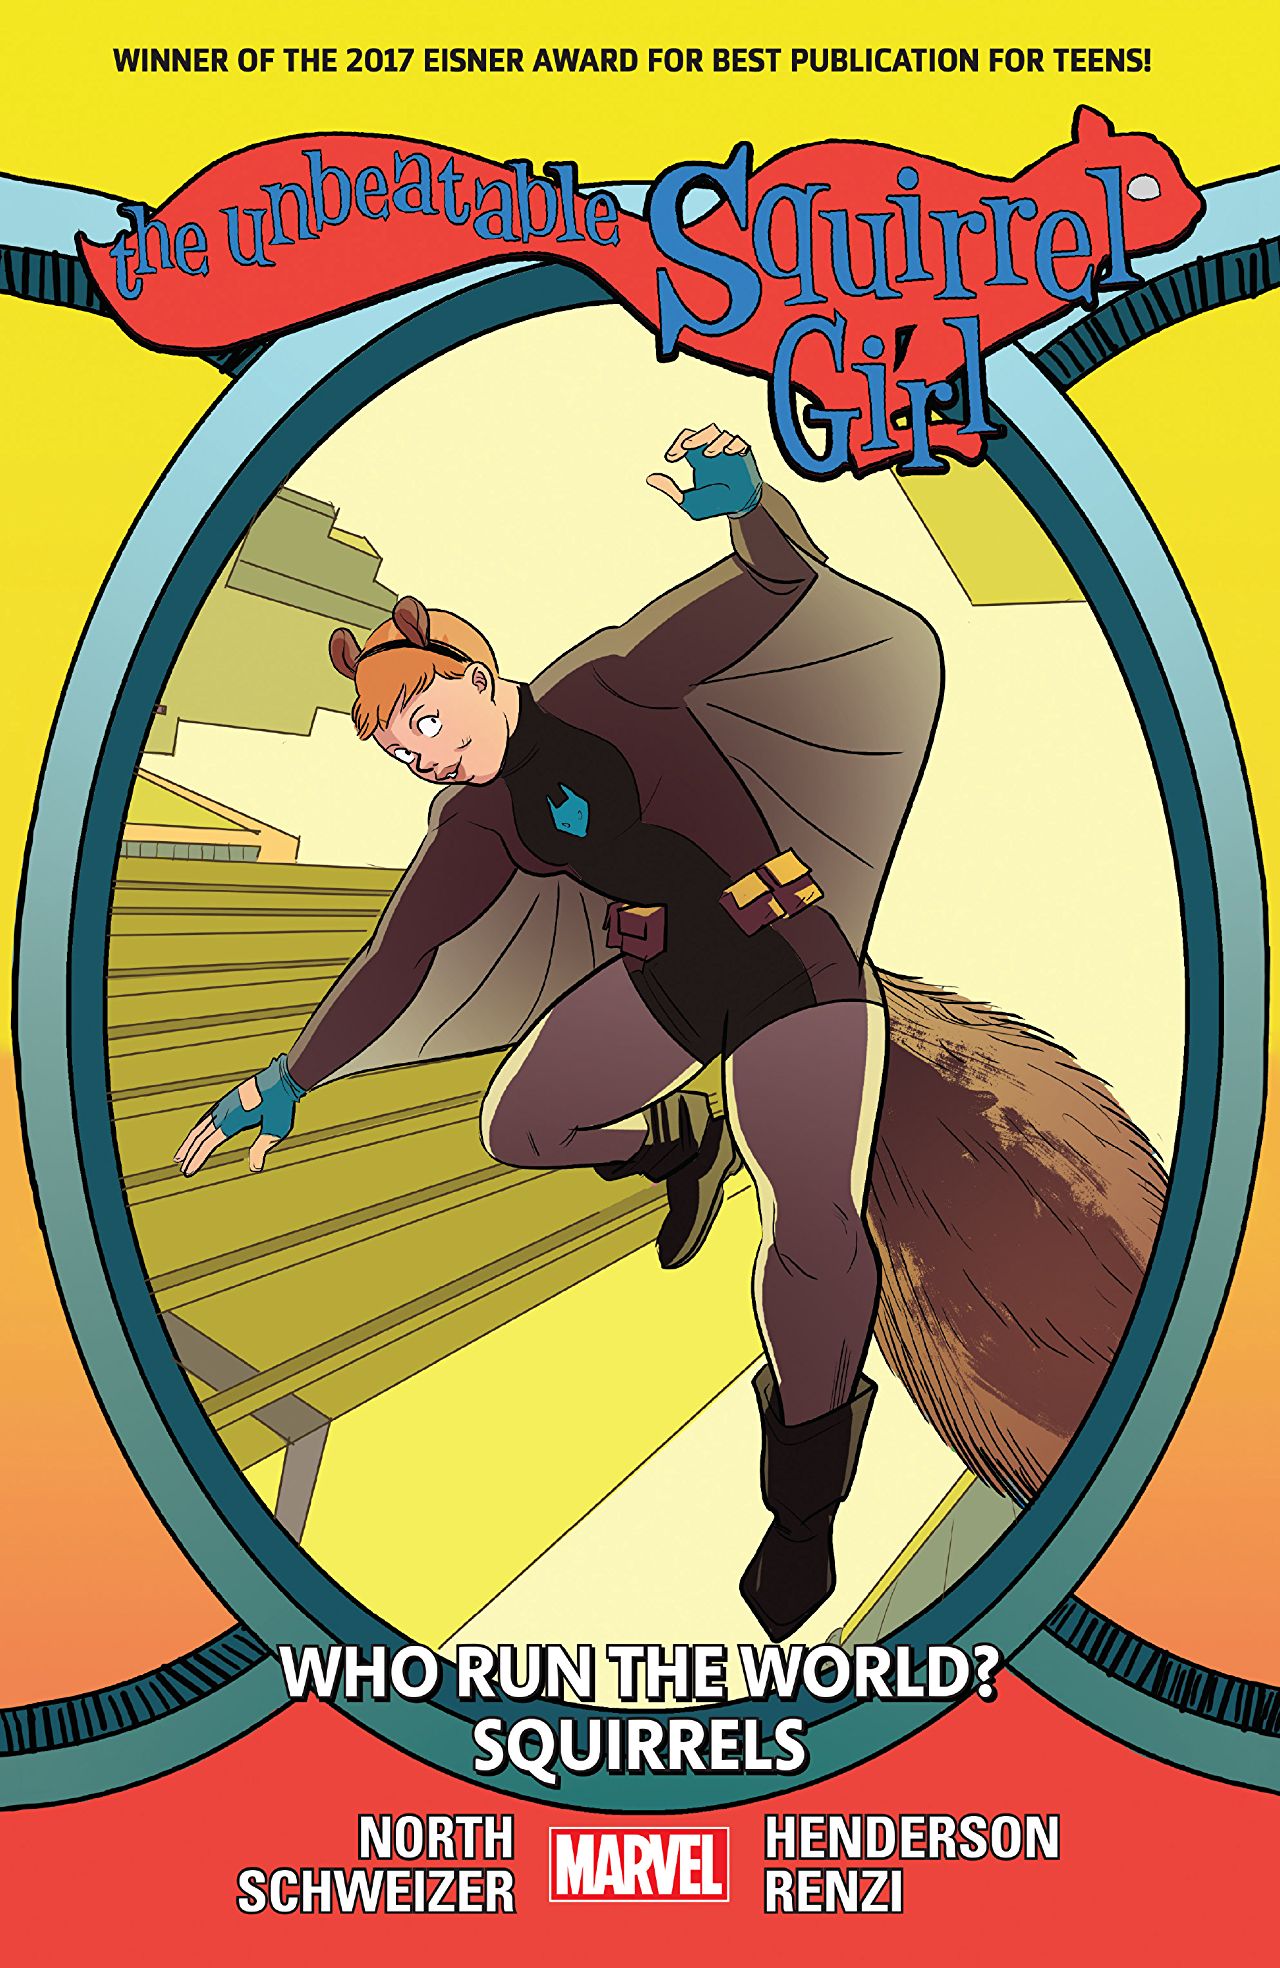 The Unbeatable Squirrel Girl Vol. 6 review: Who Run the World? Squirrels